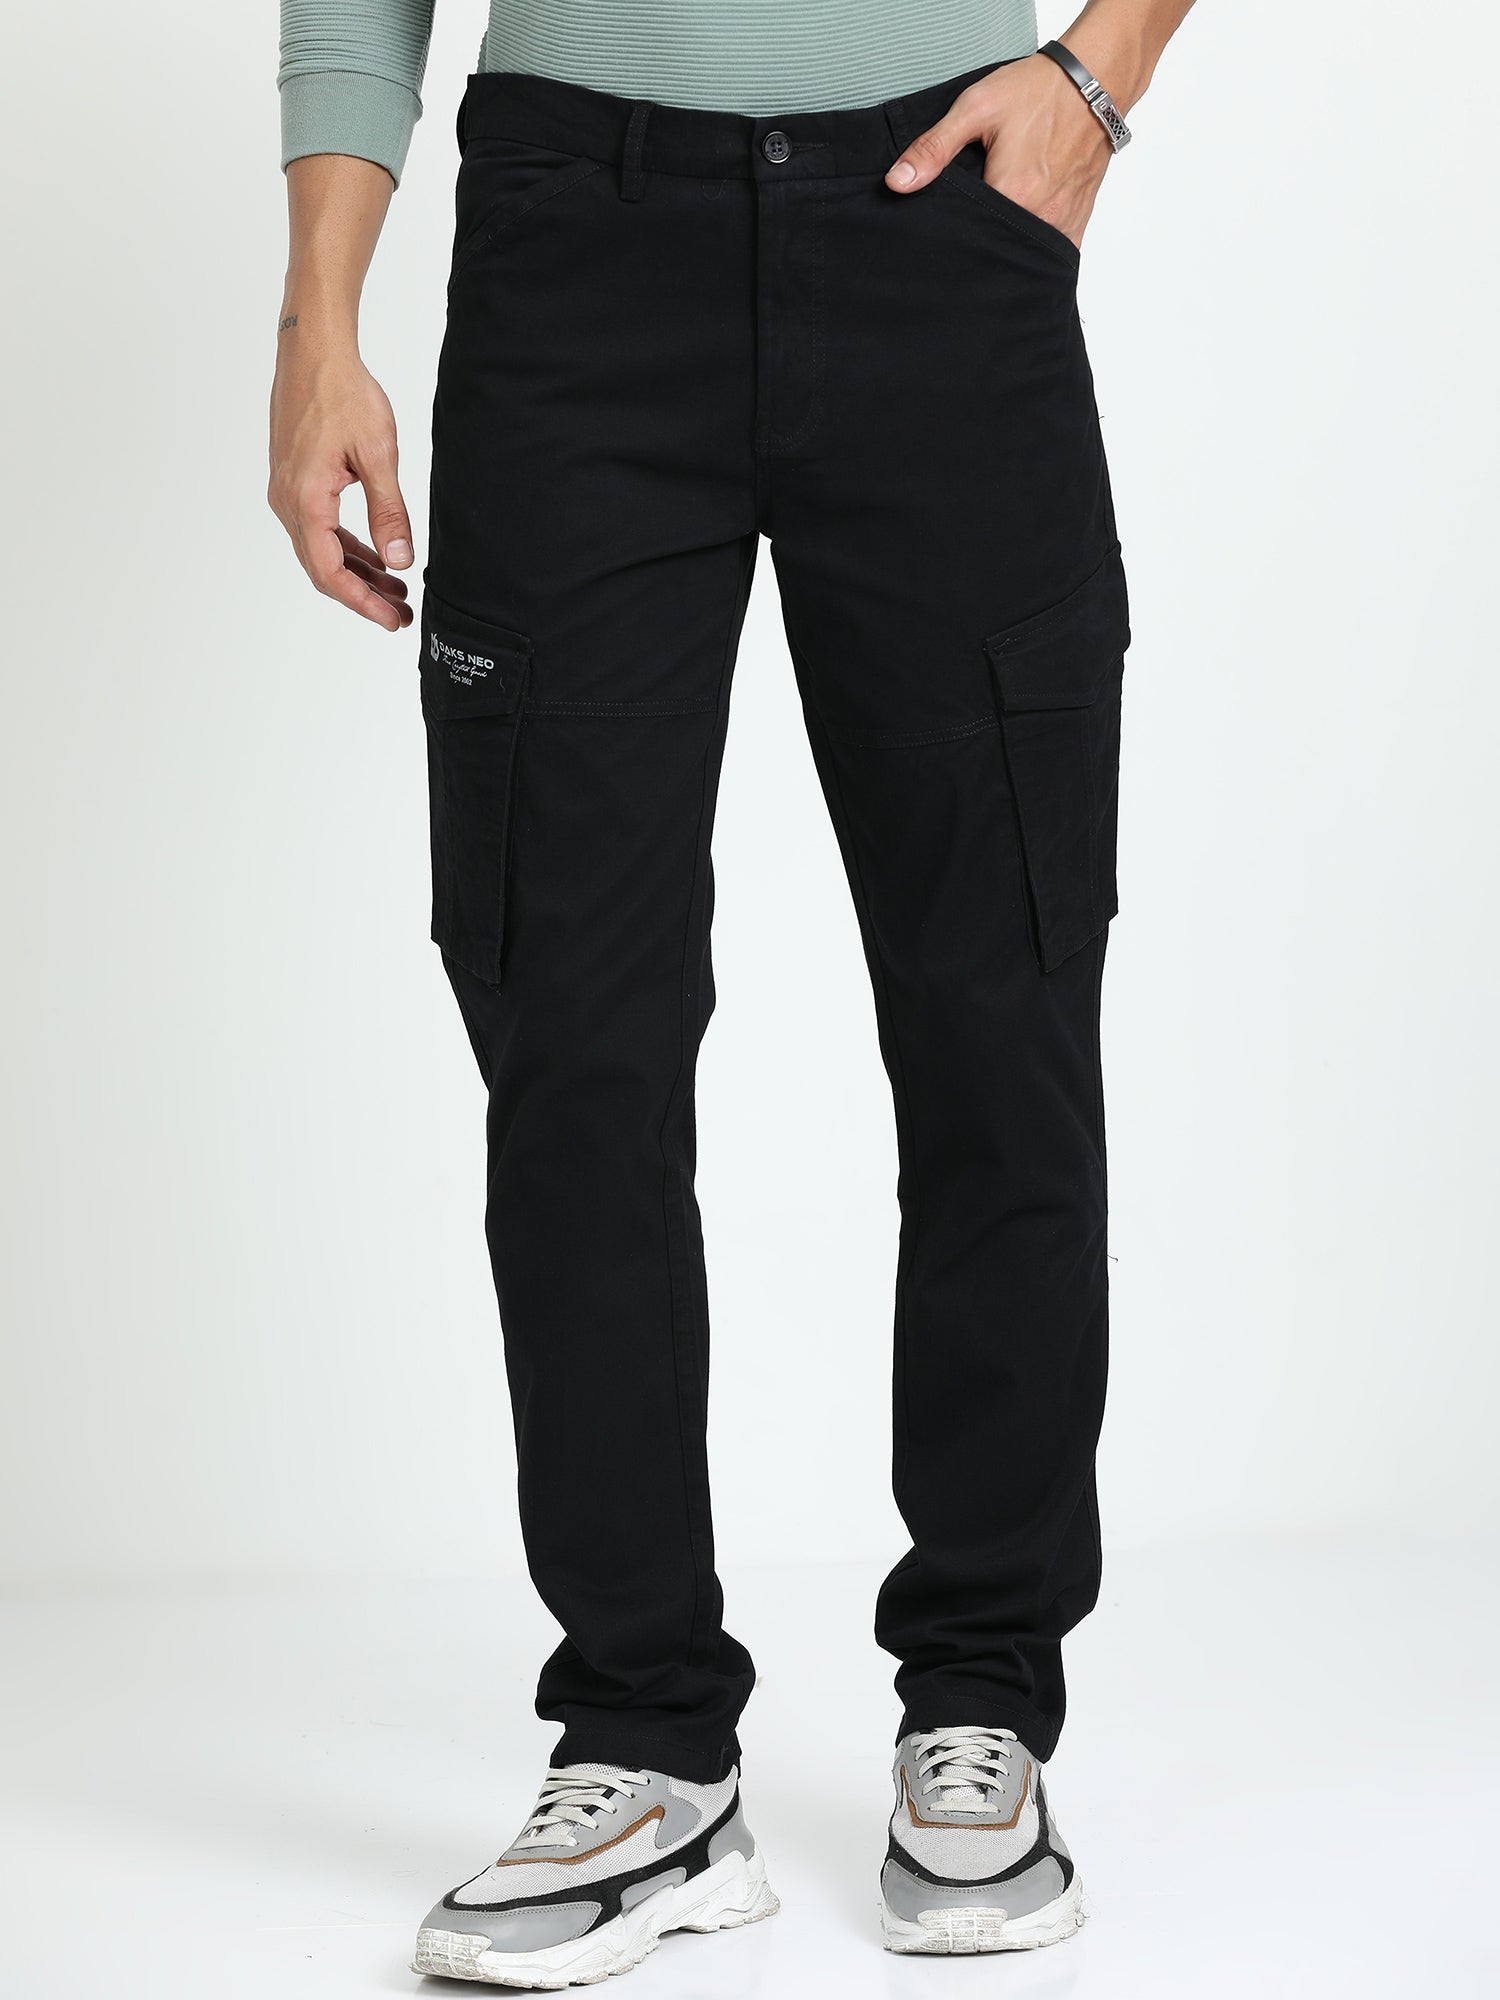 Buy Latest Stretch Grey Cargo Pants for Men Online in India